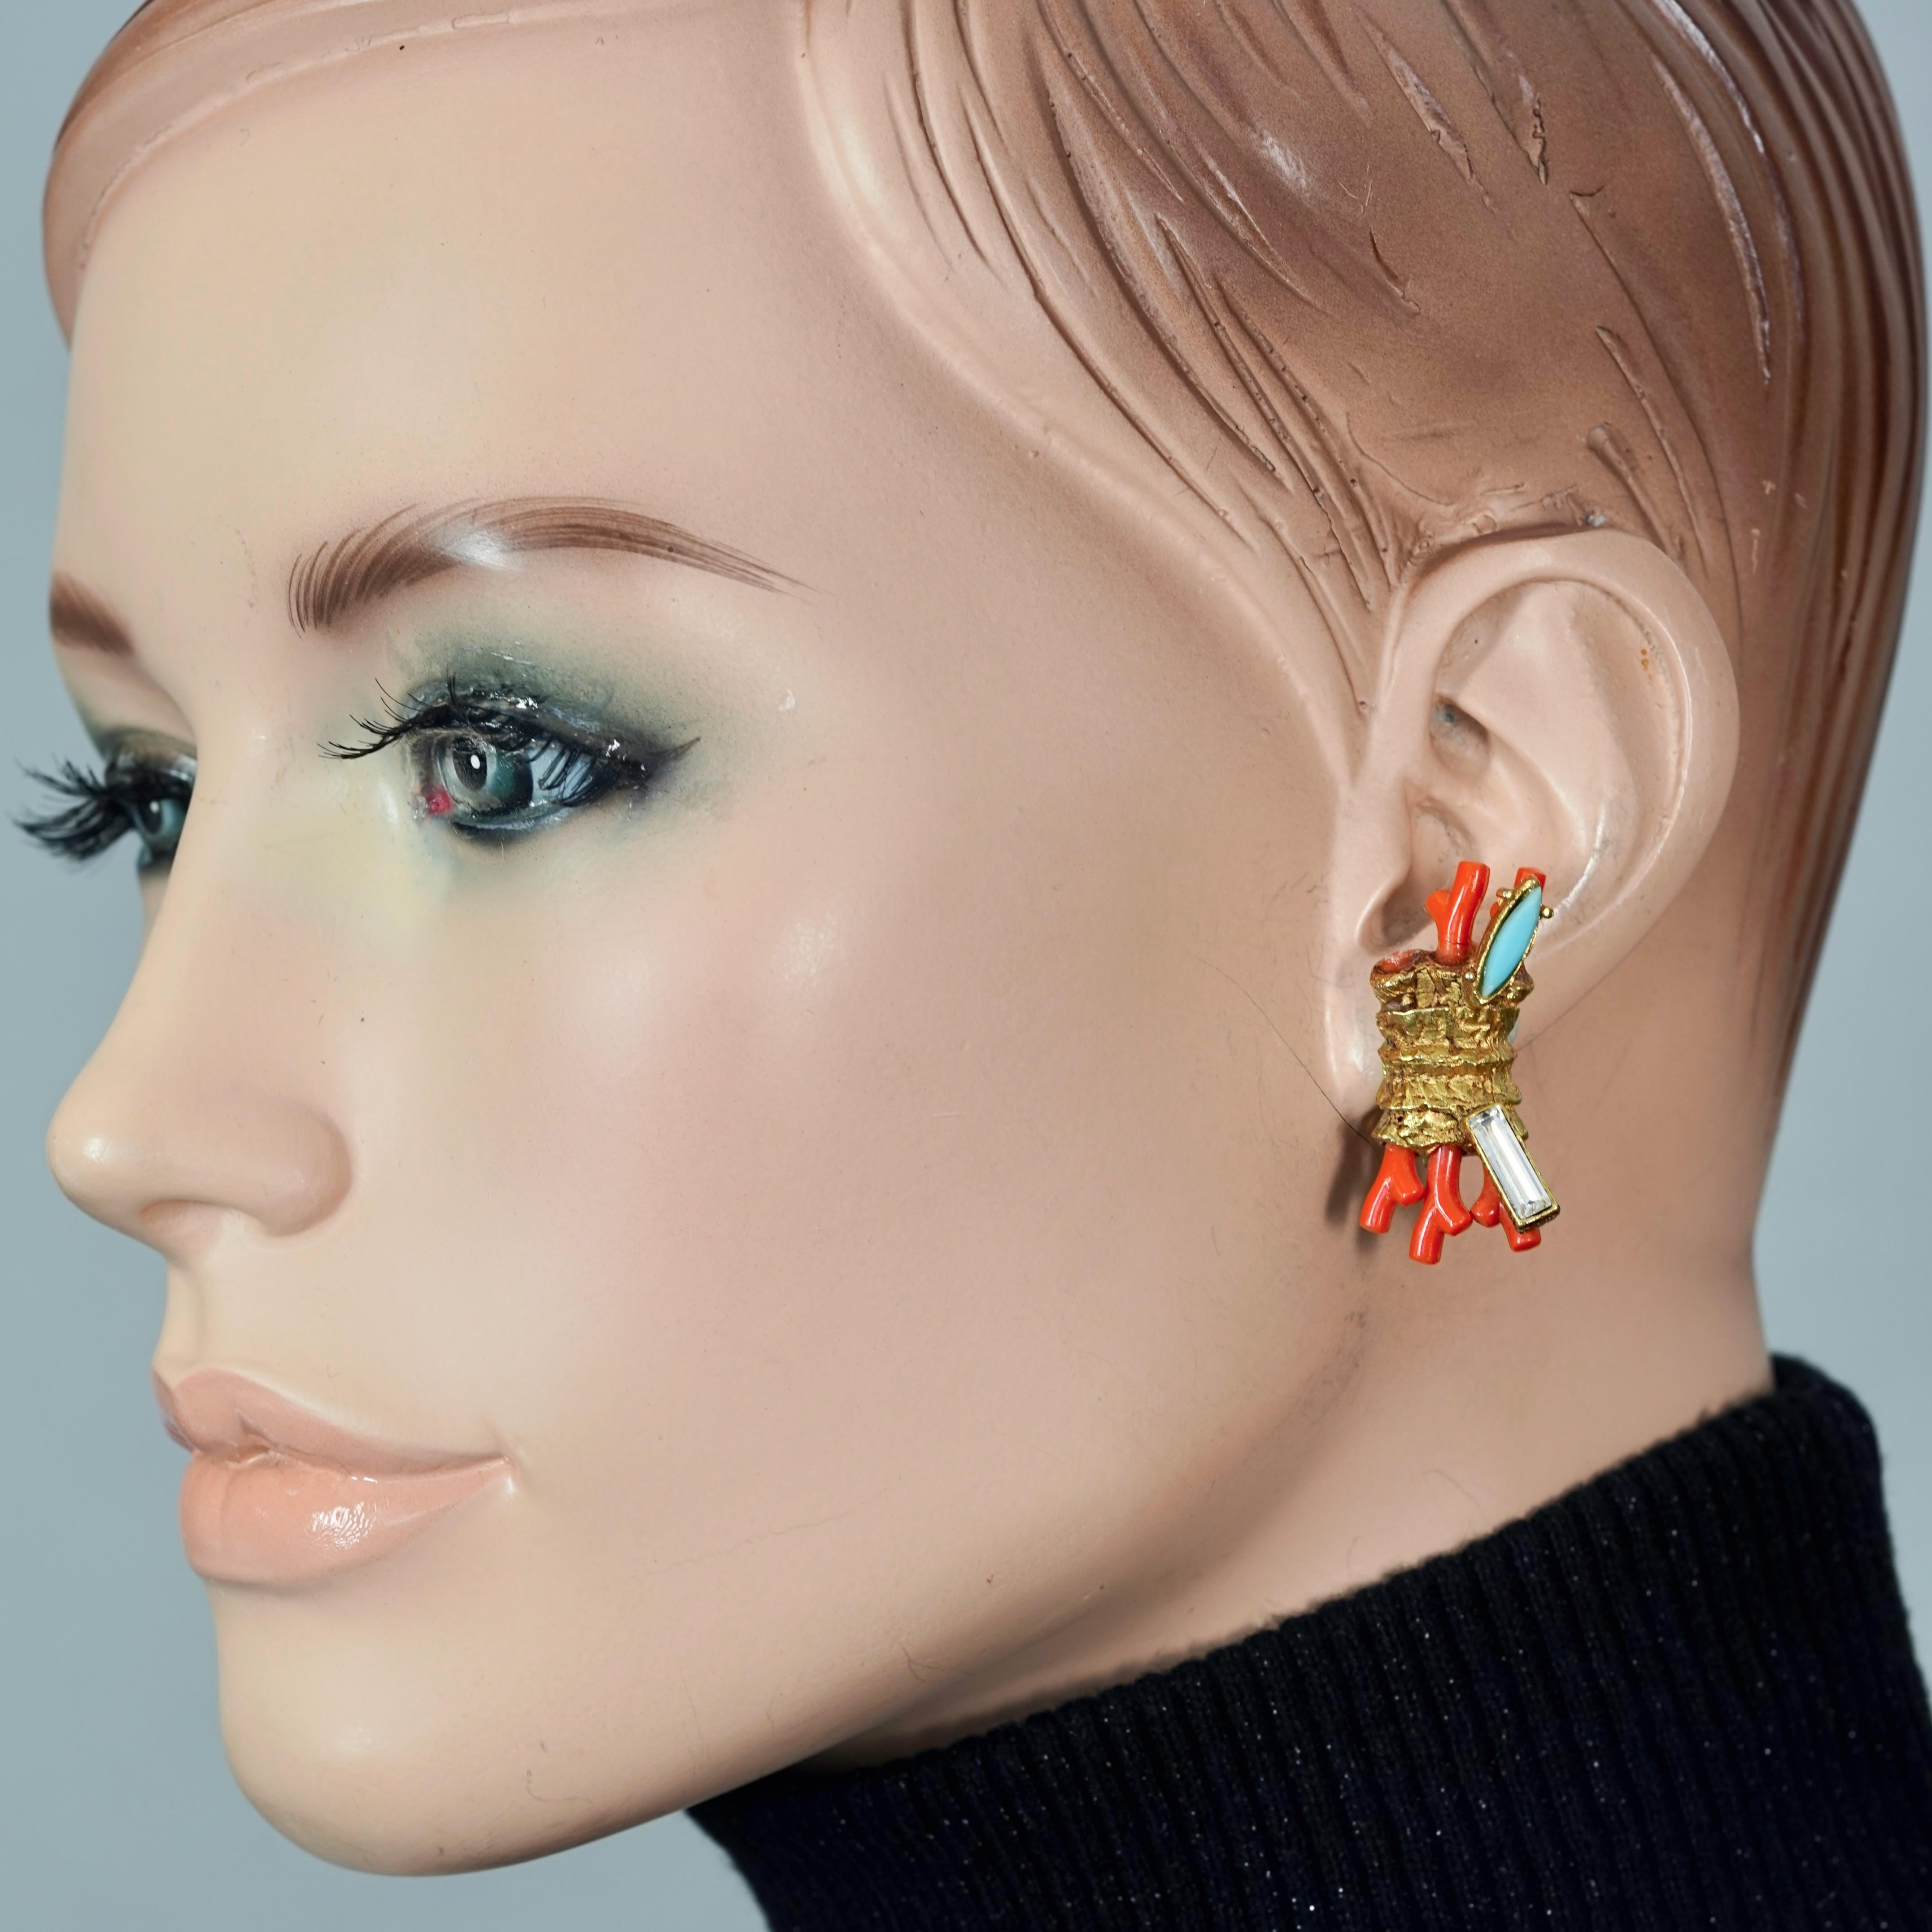 Vintage CHRISTIAN LACROIX Coral Turquoise Rhinestone Earrings

Measurements:
Height: 1.38 inches (3.5 cm)
Width: 0.75 inch (1.9 cm)
Weight per Earring: 9 grams

Features:
- 100% Authentic CHRISTIAN LACROIX.
- Gilt textured earrings with sculptured